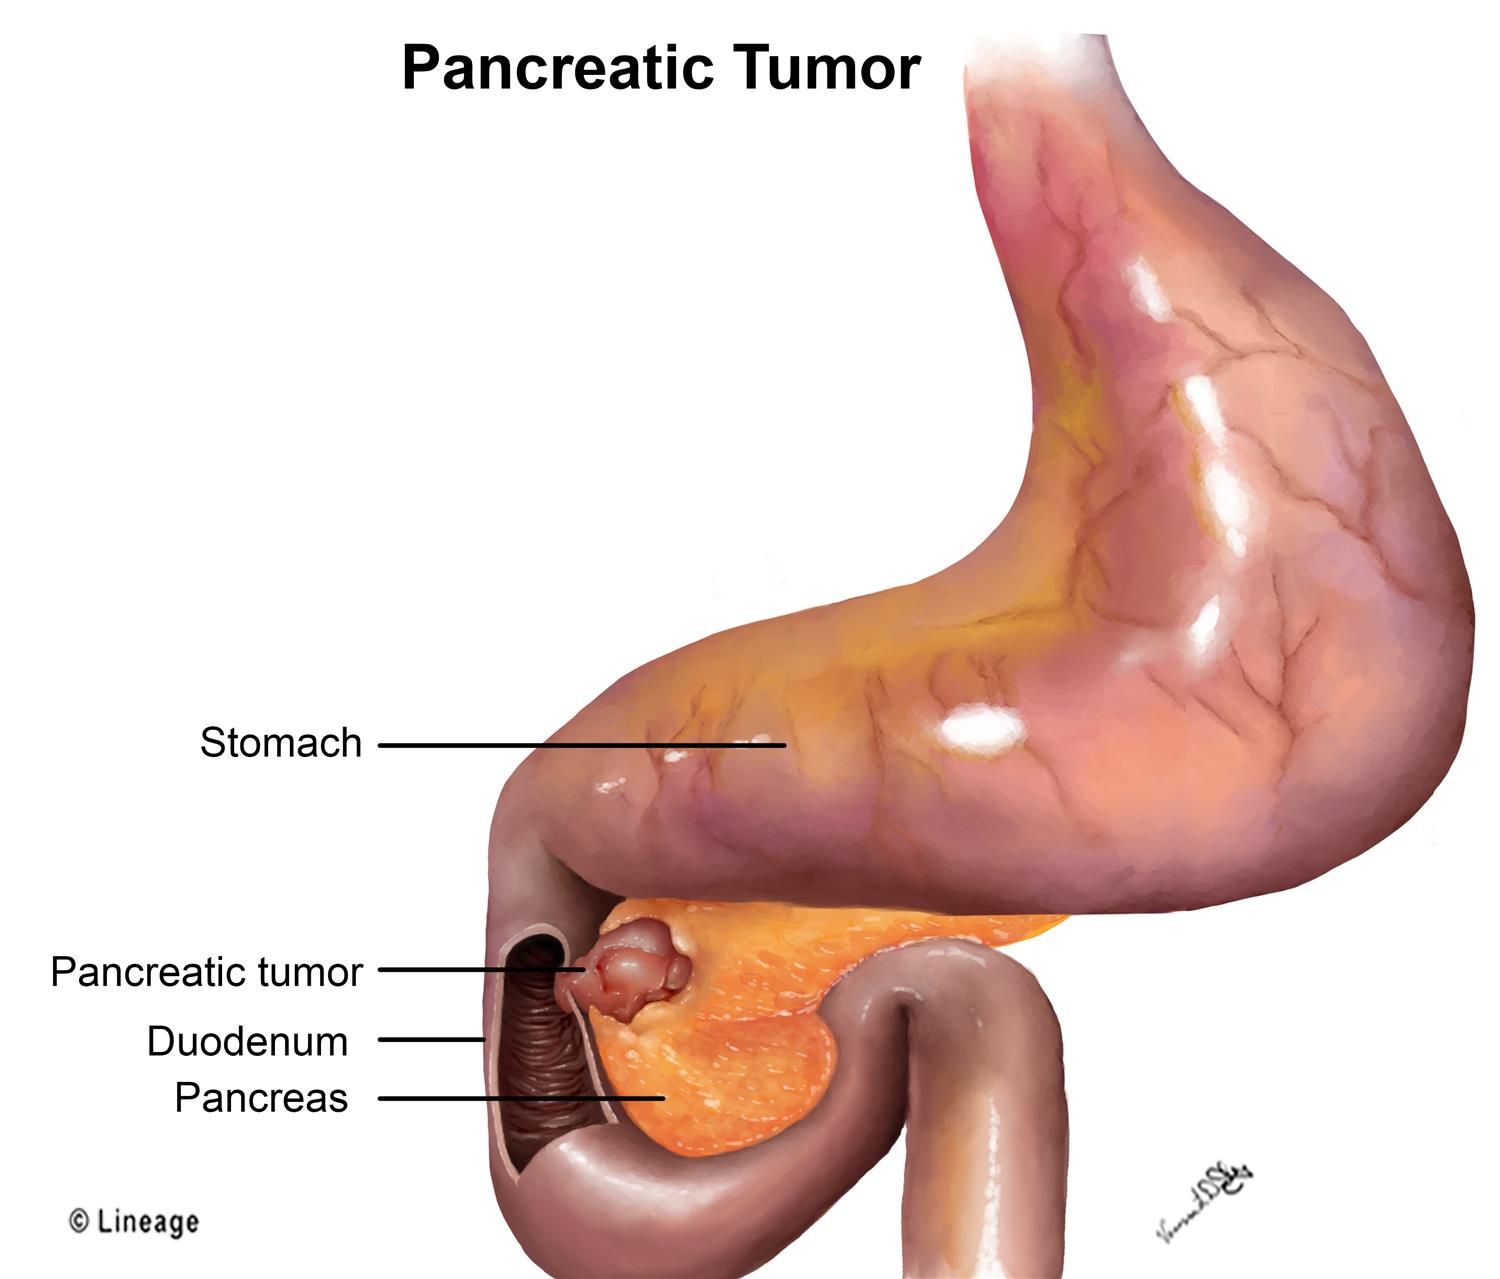 How to Tell If You Have a Pancreatic Tumor?